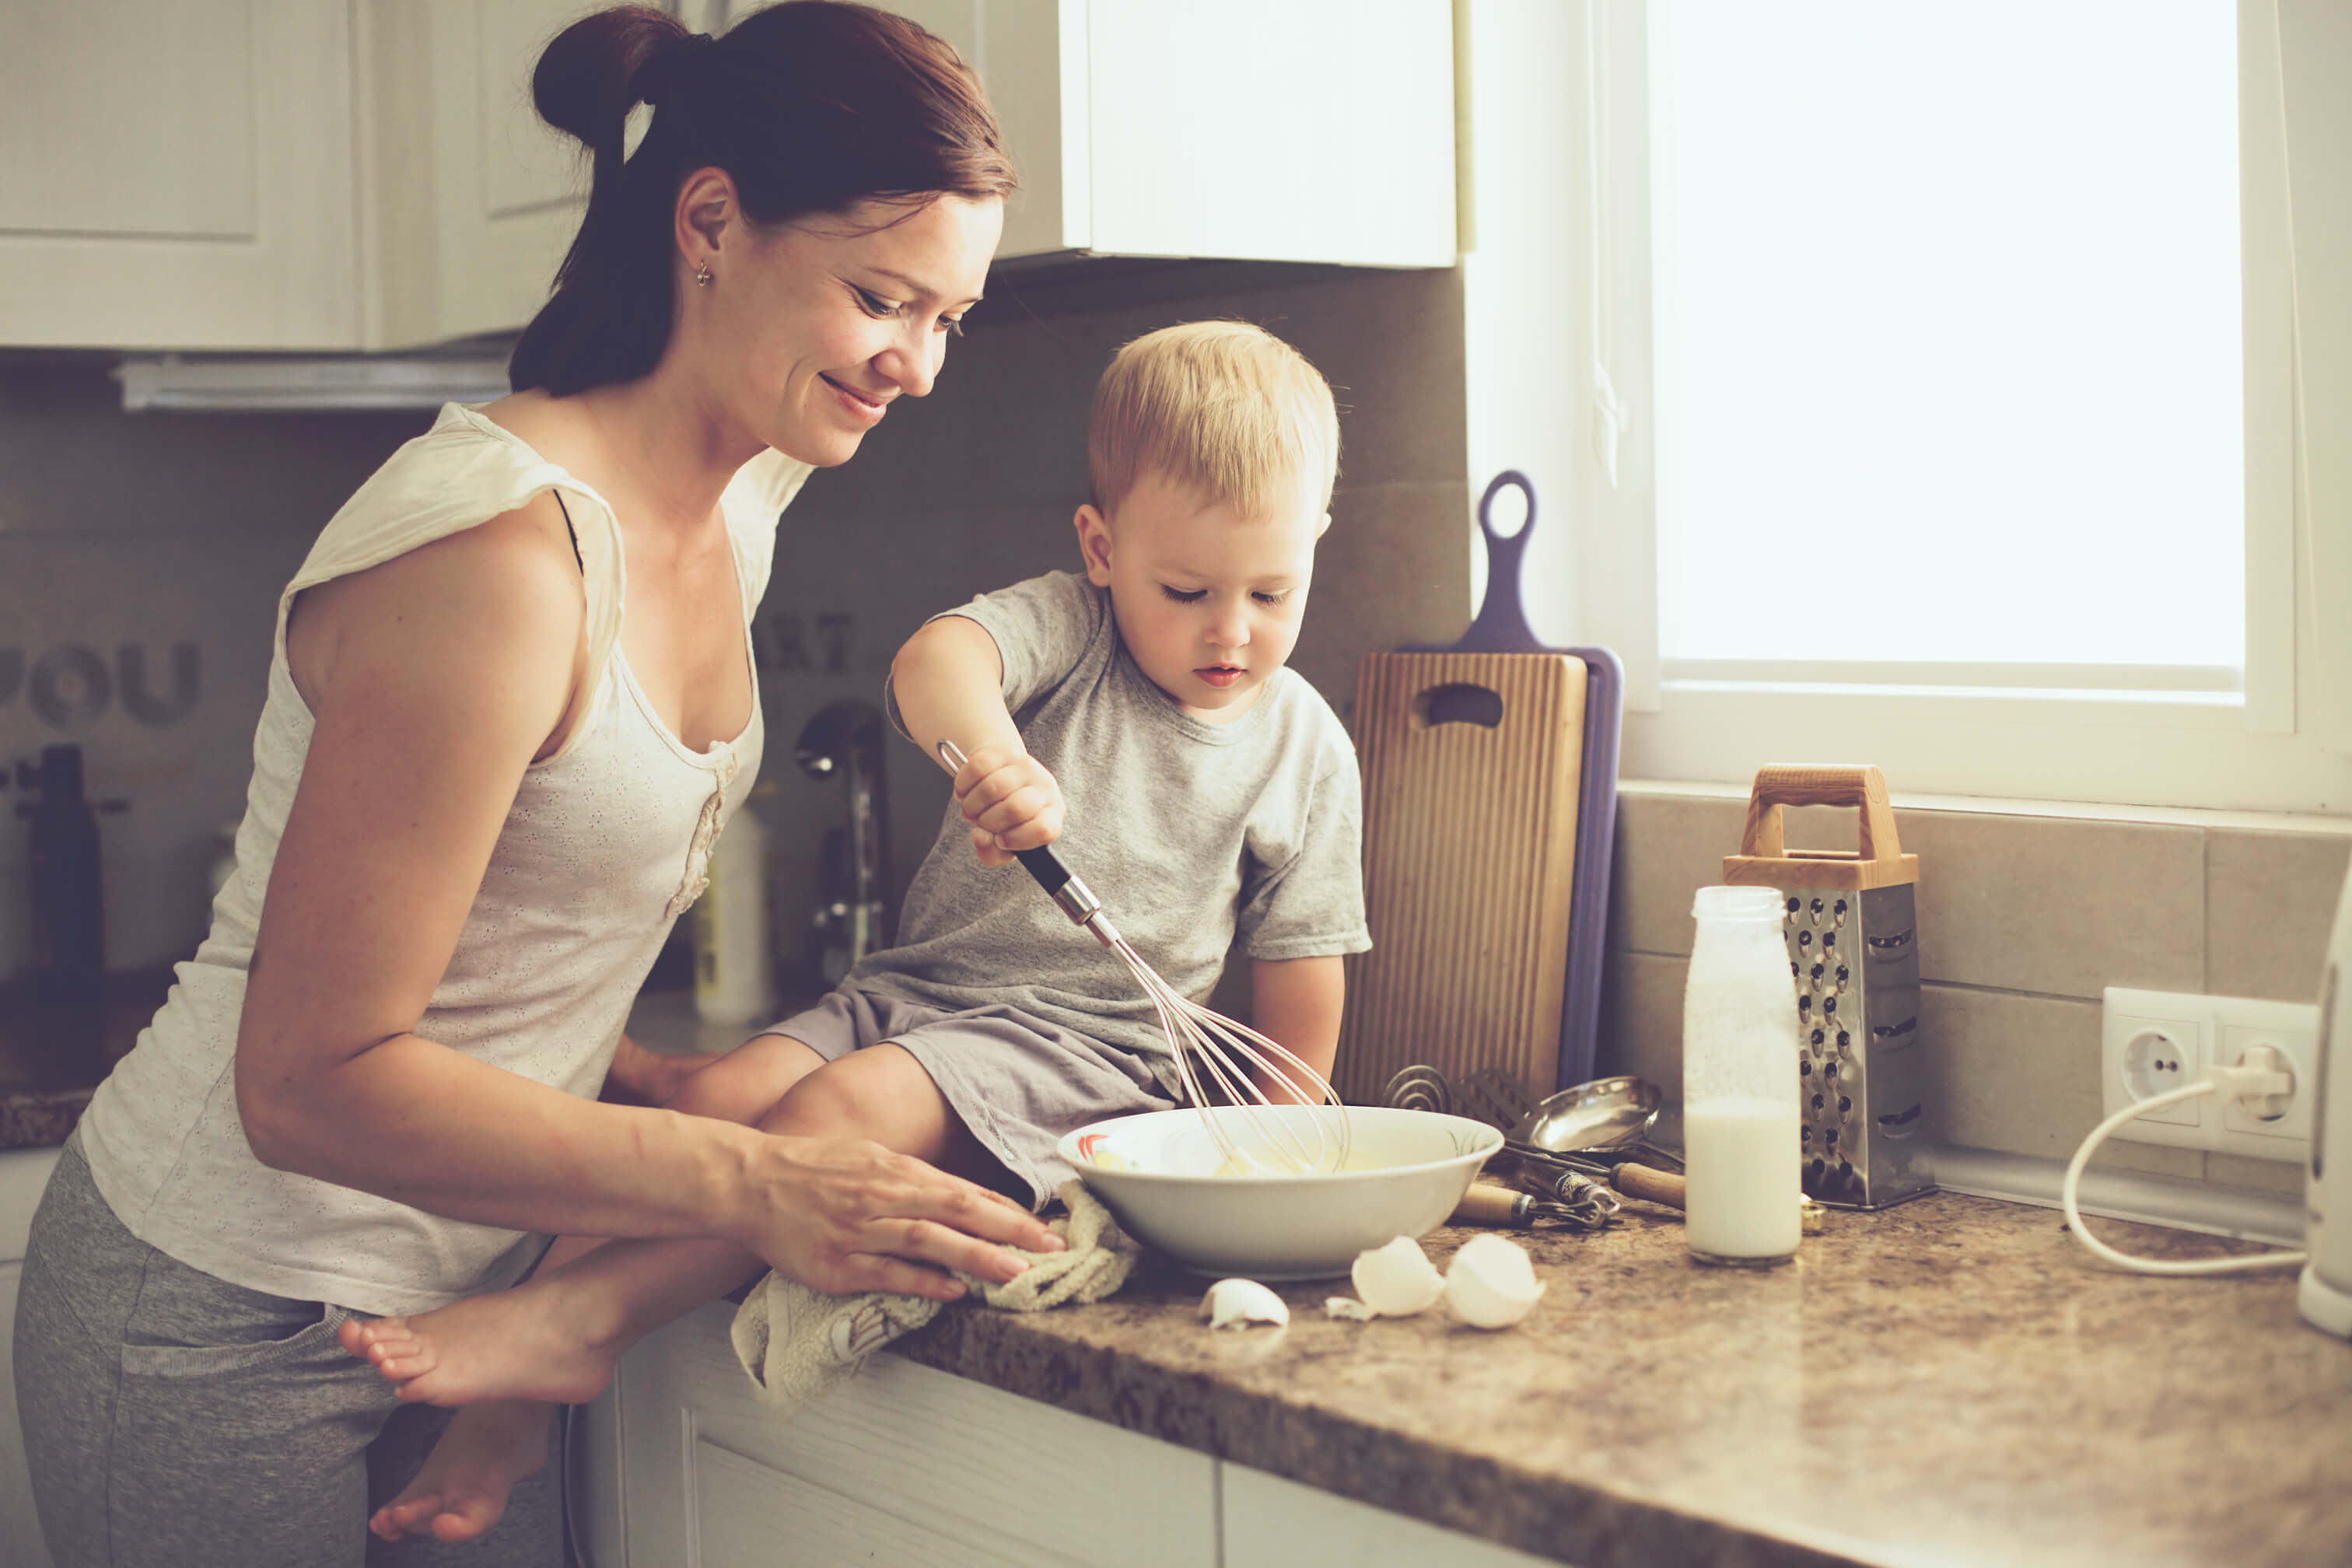 An image of a mother with her two-year-old child cooking in the kitchen.